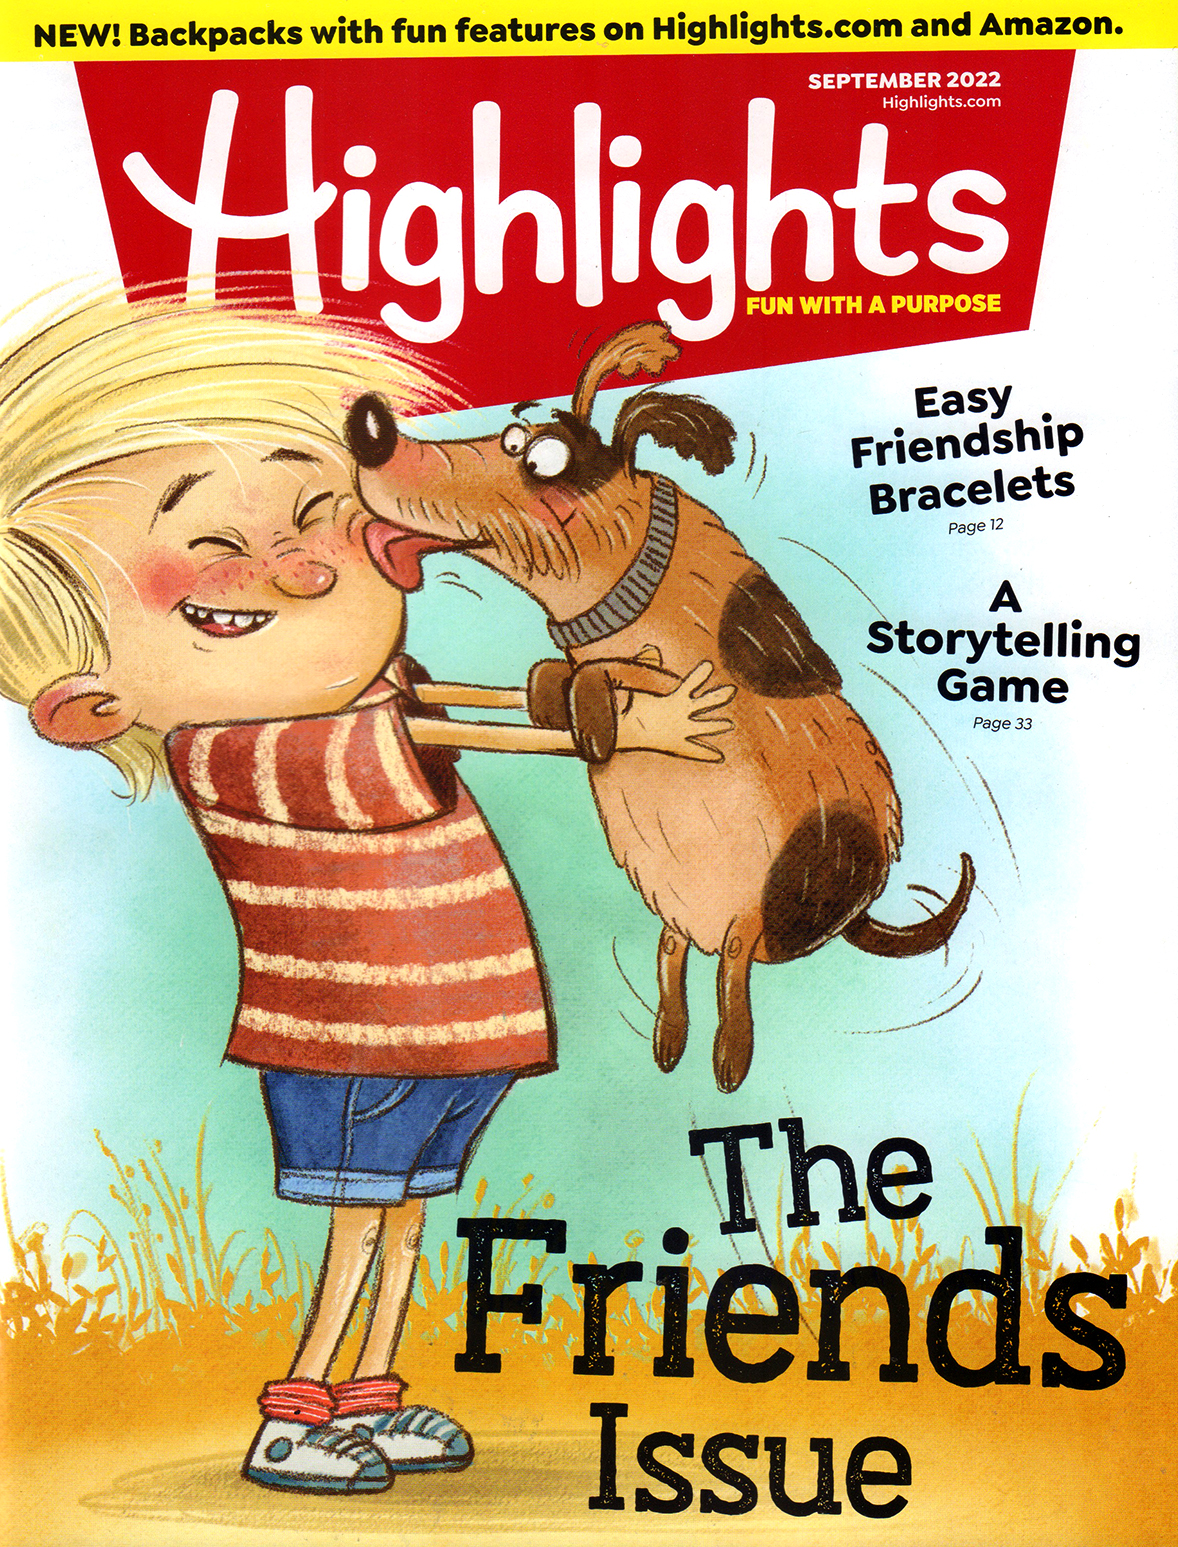 Friends issues. Highlight Magazine for Kids. Picture Highlight Magazine for Kids. Highlight Magazine silly.